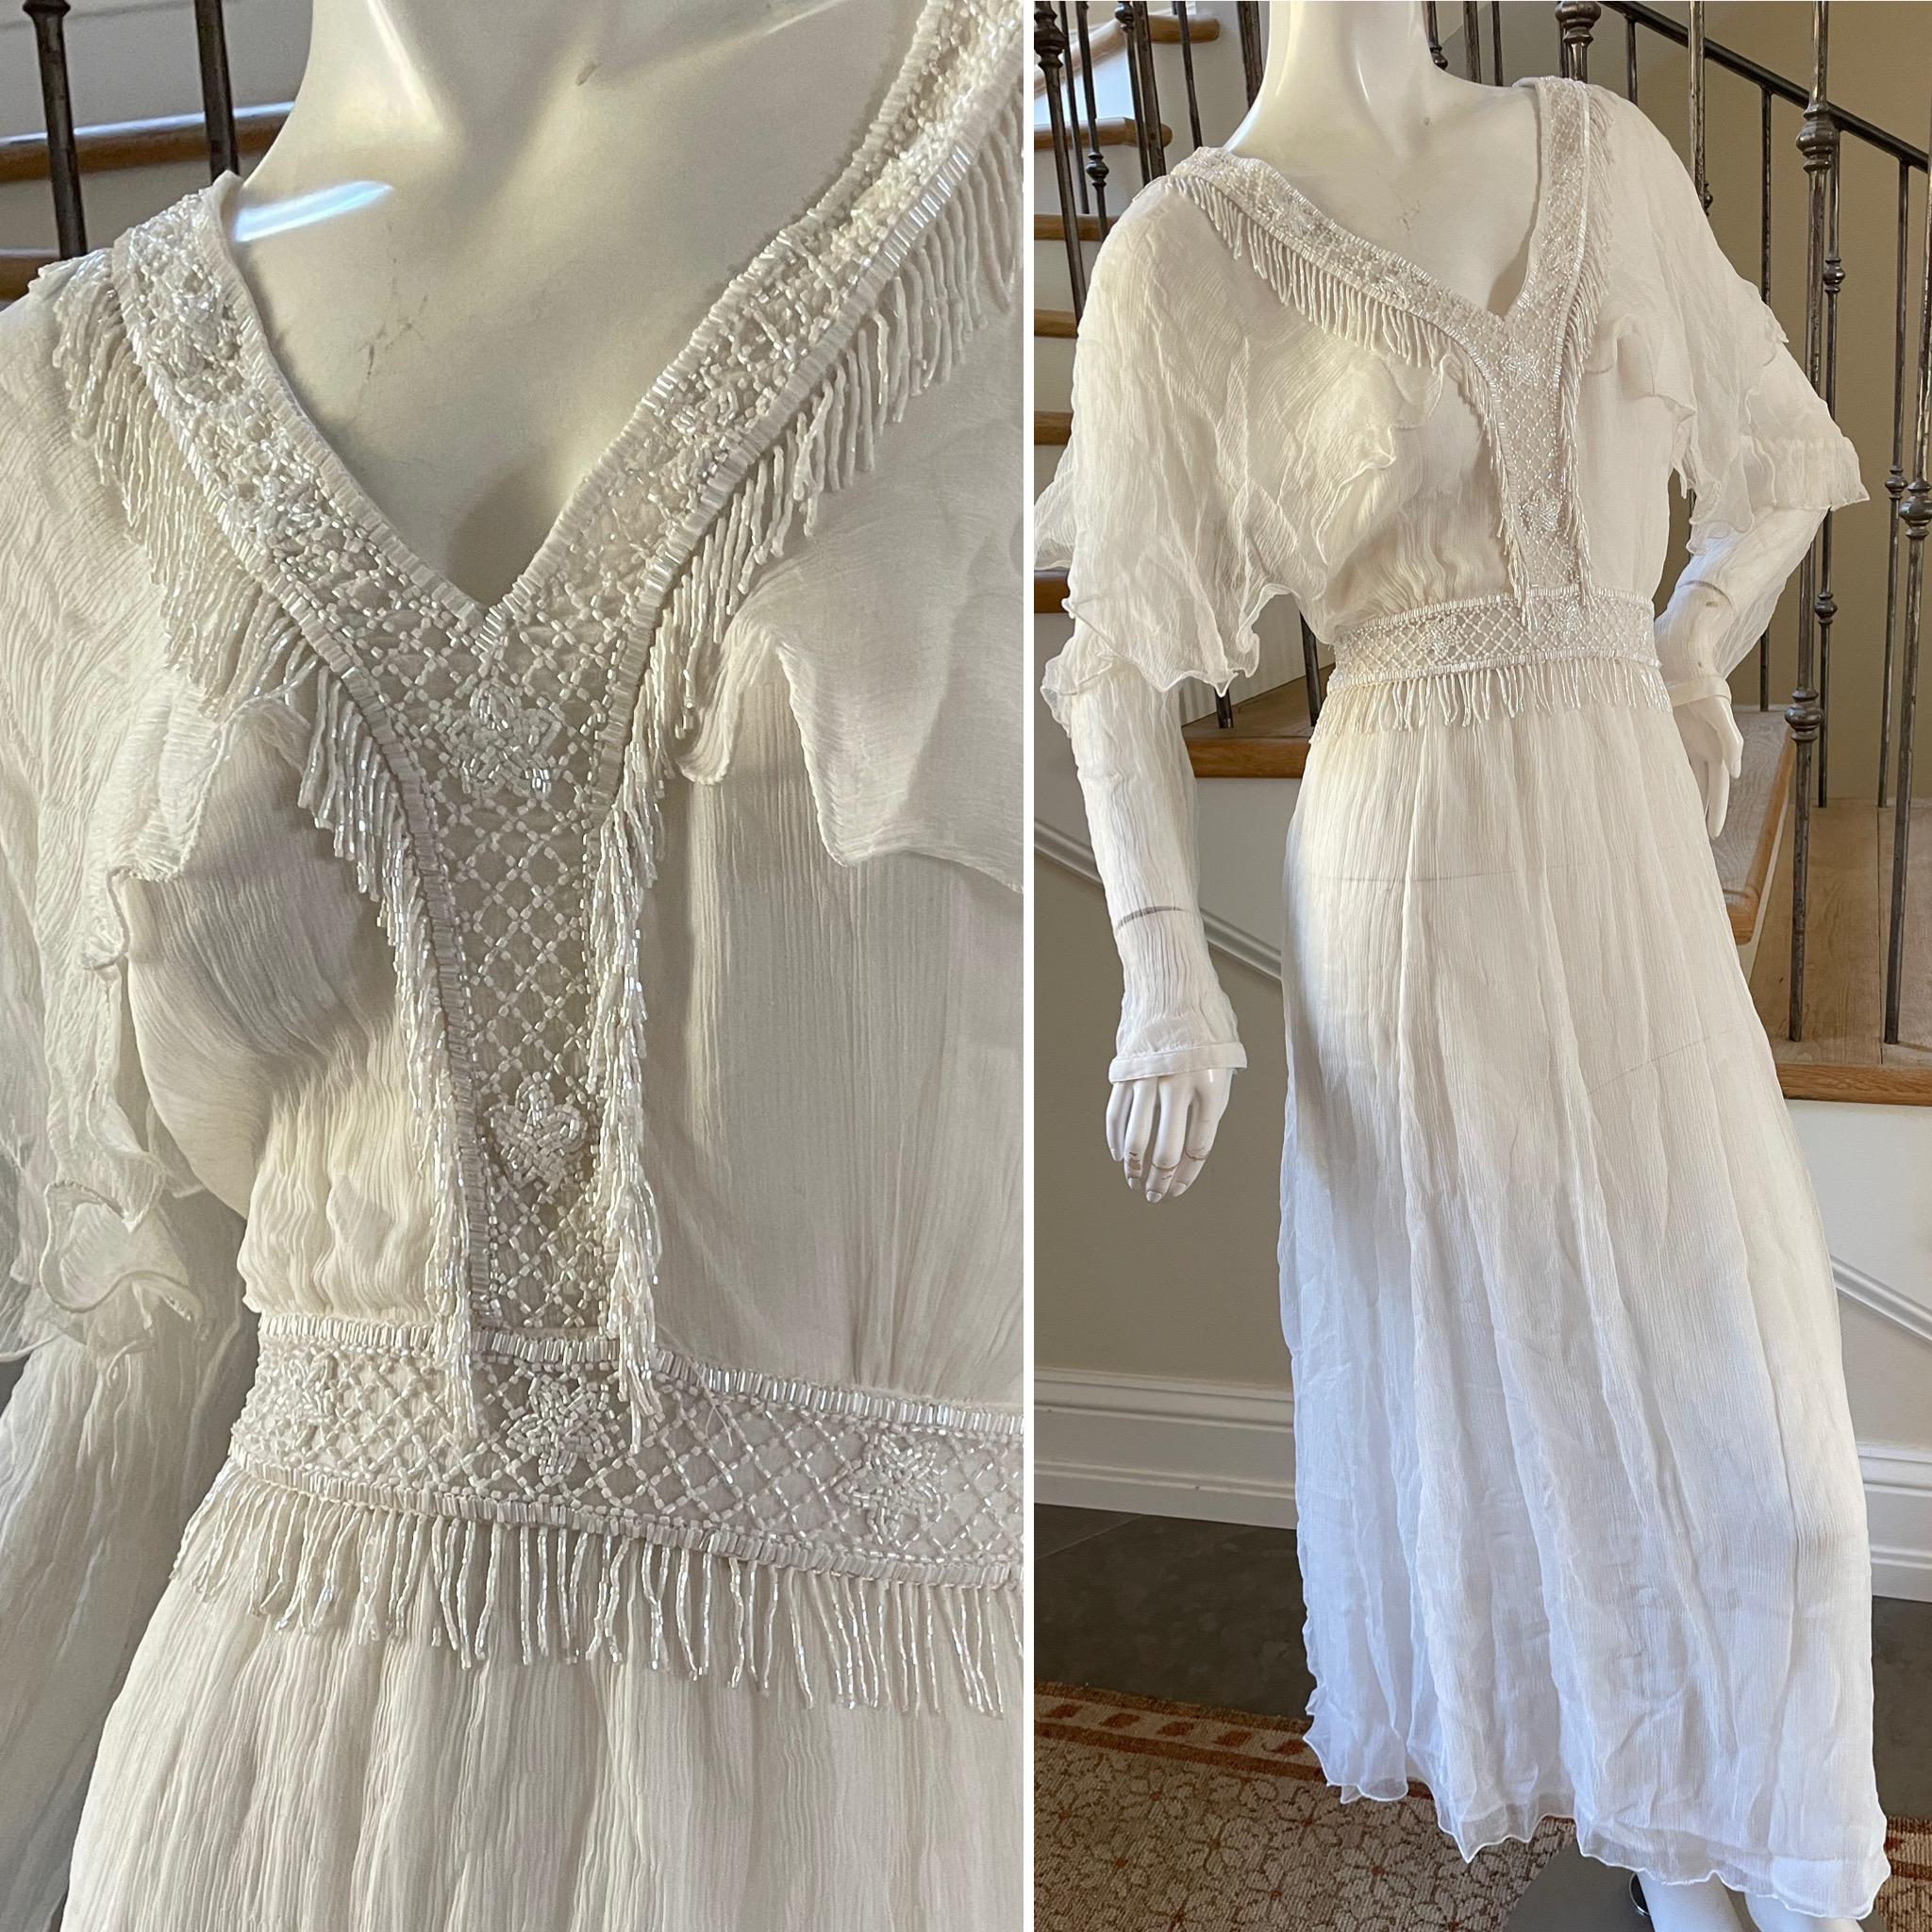 Just Cavalli Romantic Diaphanous White Dress with Bead Fringe by Roberto Cavalli .
This would make a nice wedding dress.
NWT
 Sz 44 
 Bust 38